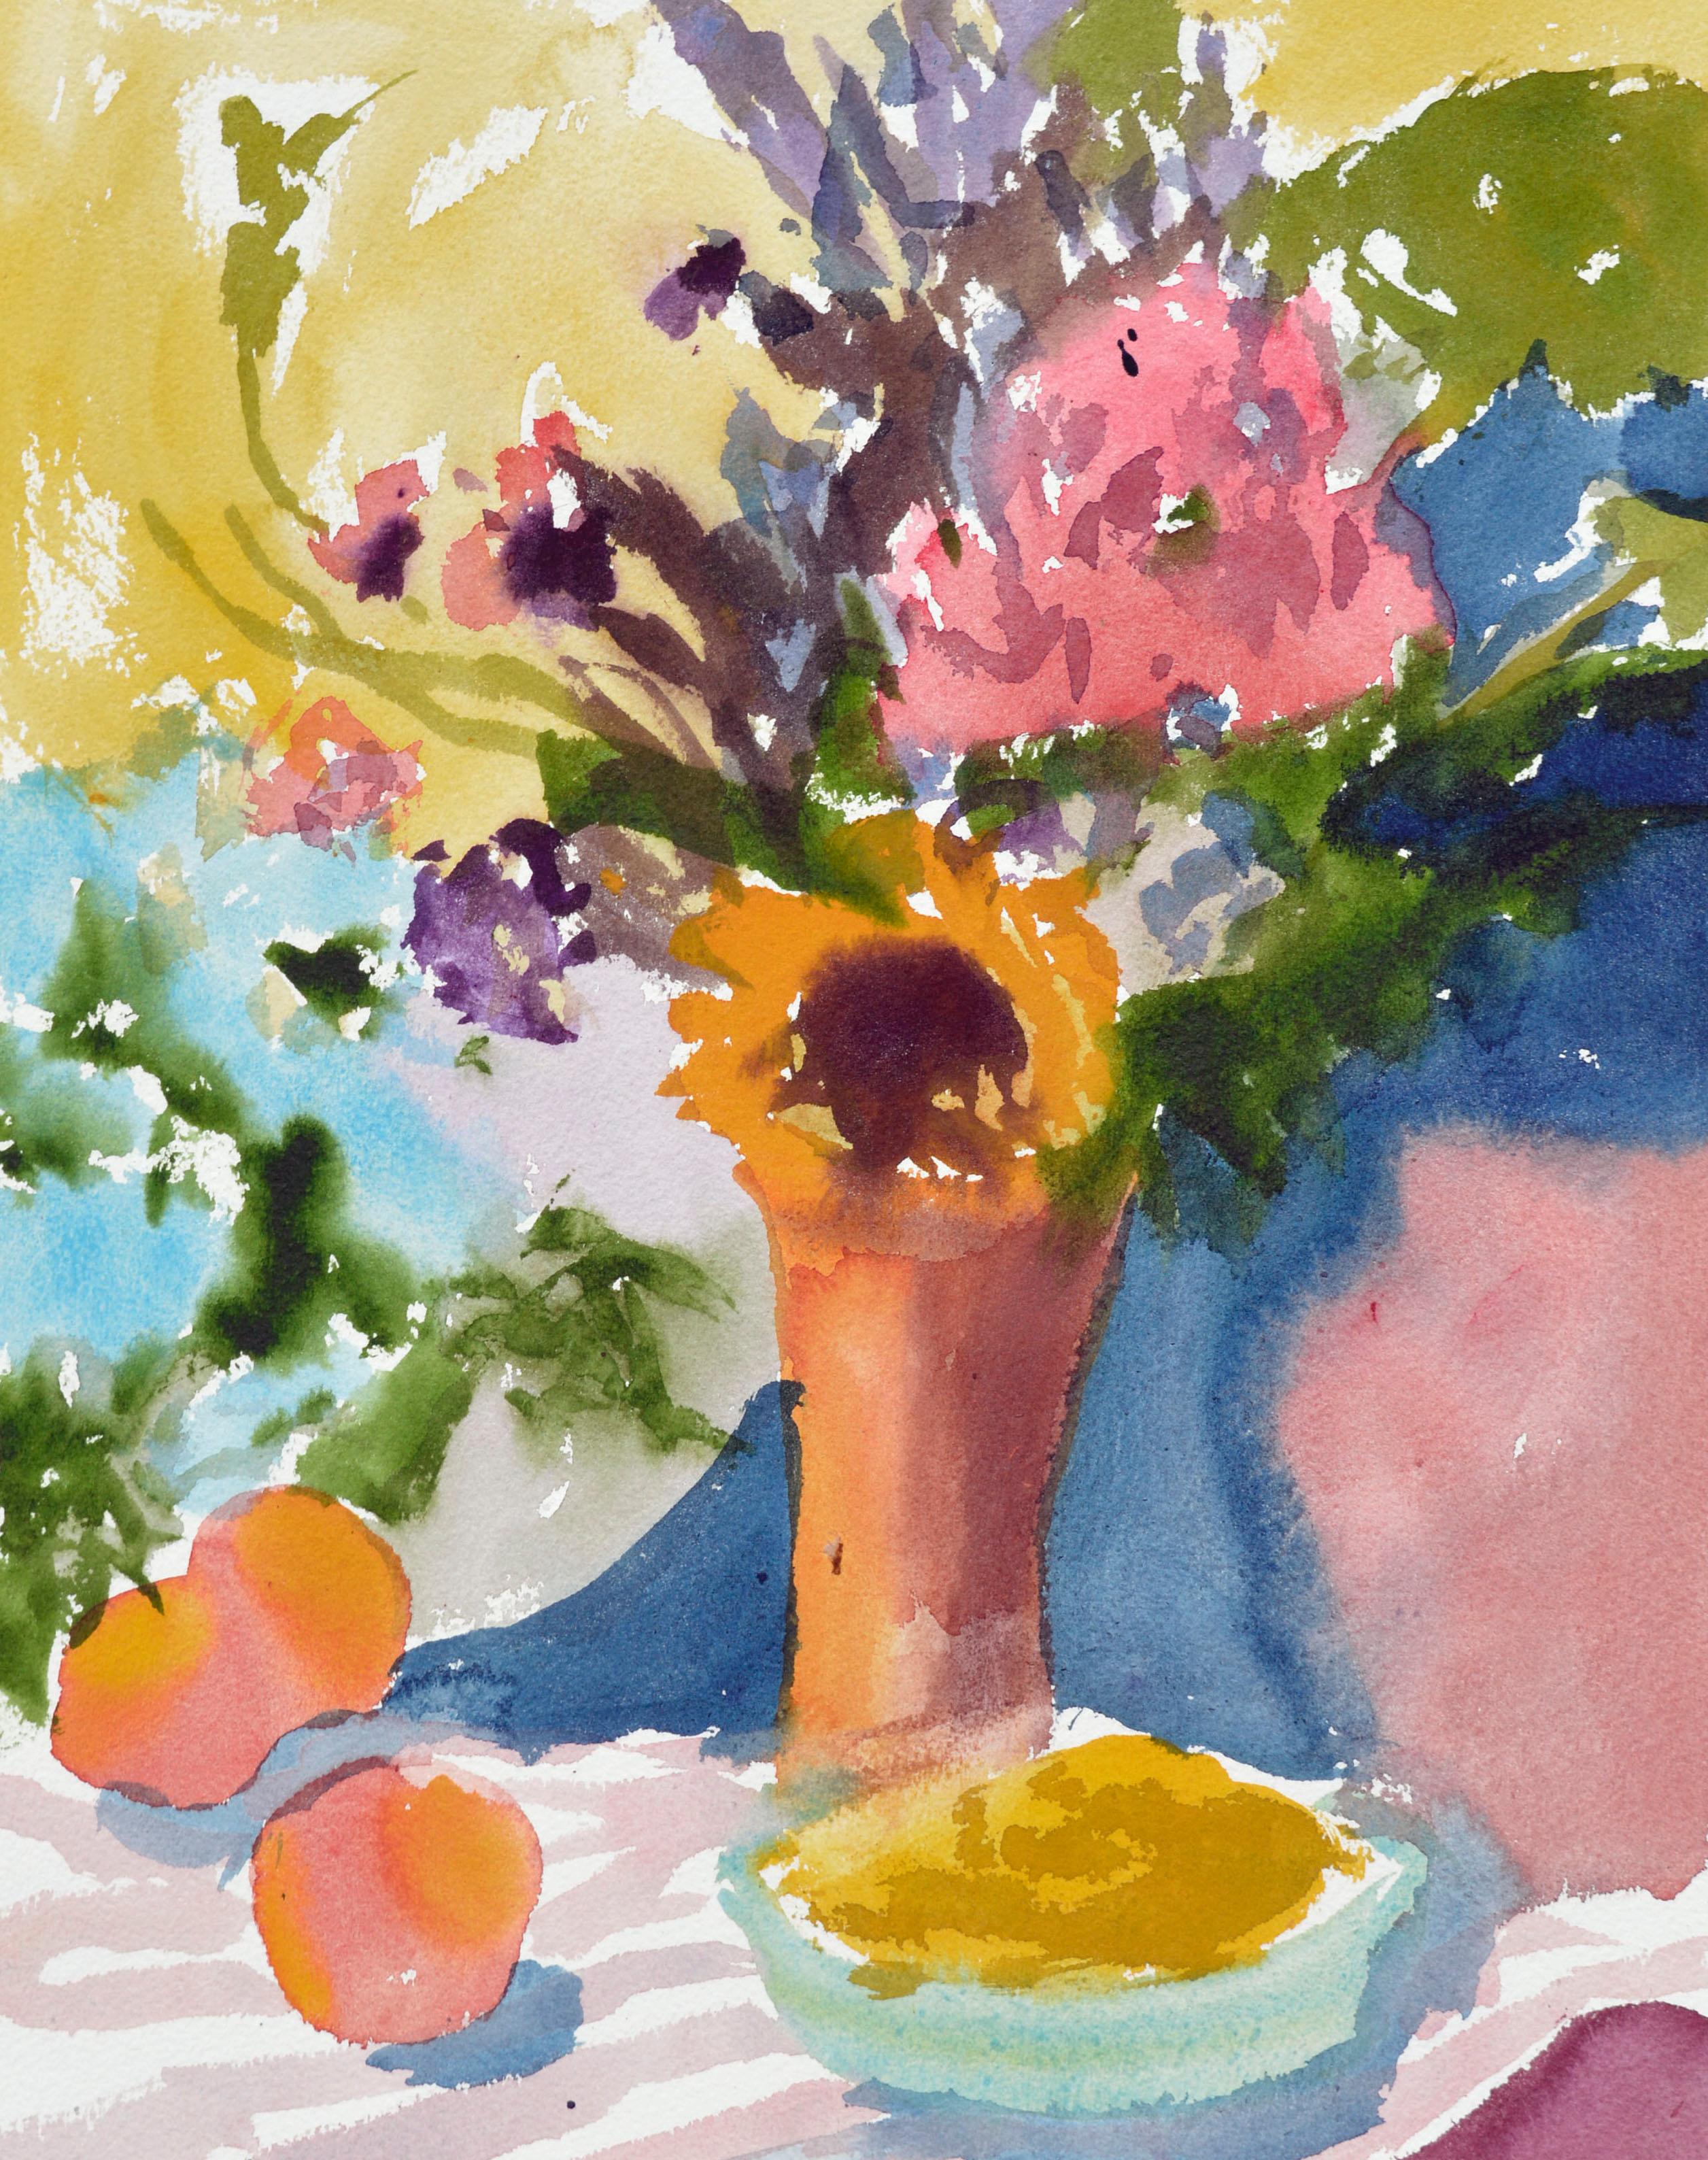 Flowers & Peaches - Summer Still Life  - Art by Les Anderson